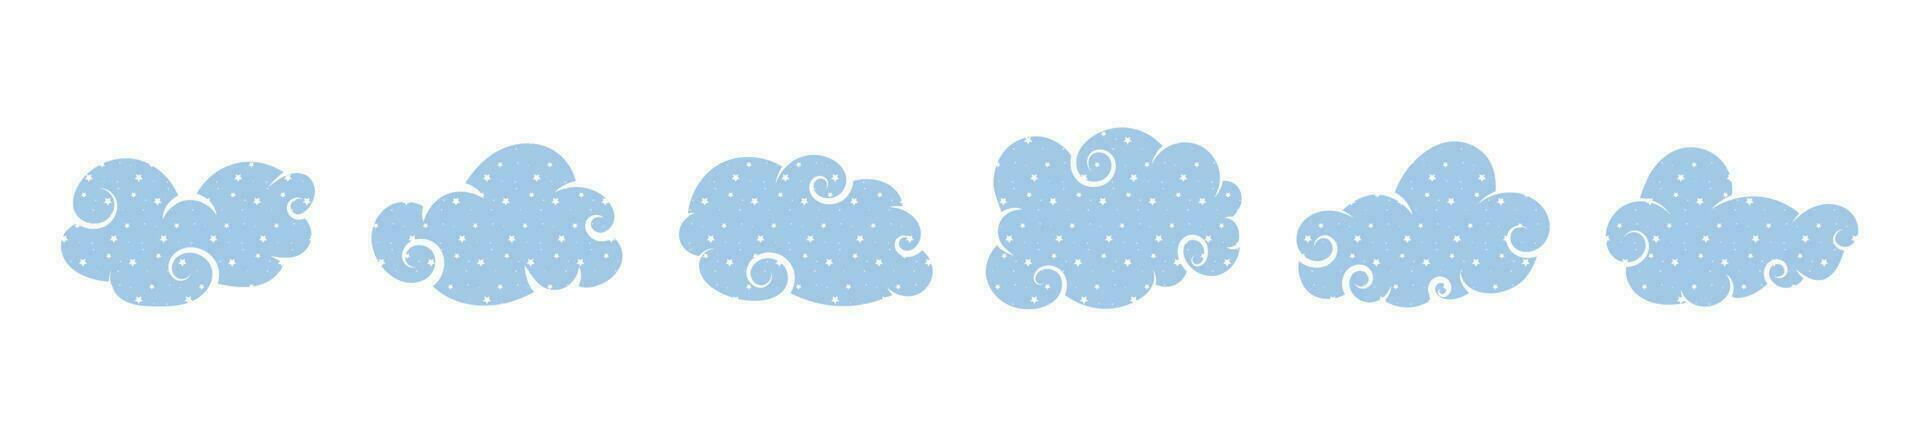 cartoon fantasy cloud with swirl line and stars sprinkle imagination dream and fantasy style vector